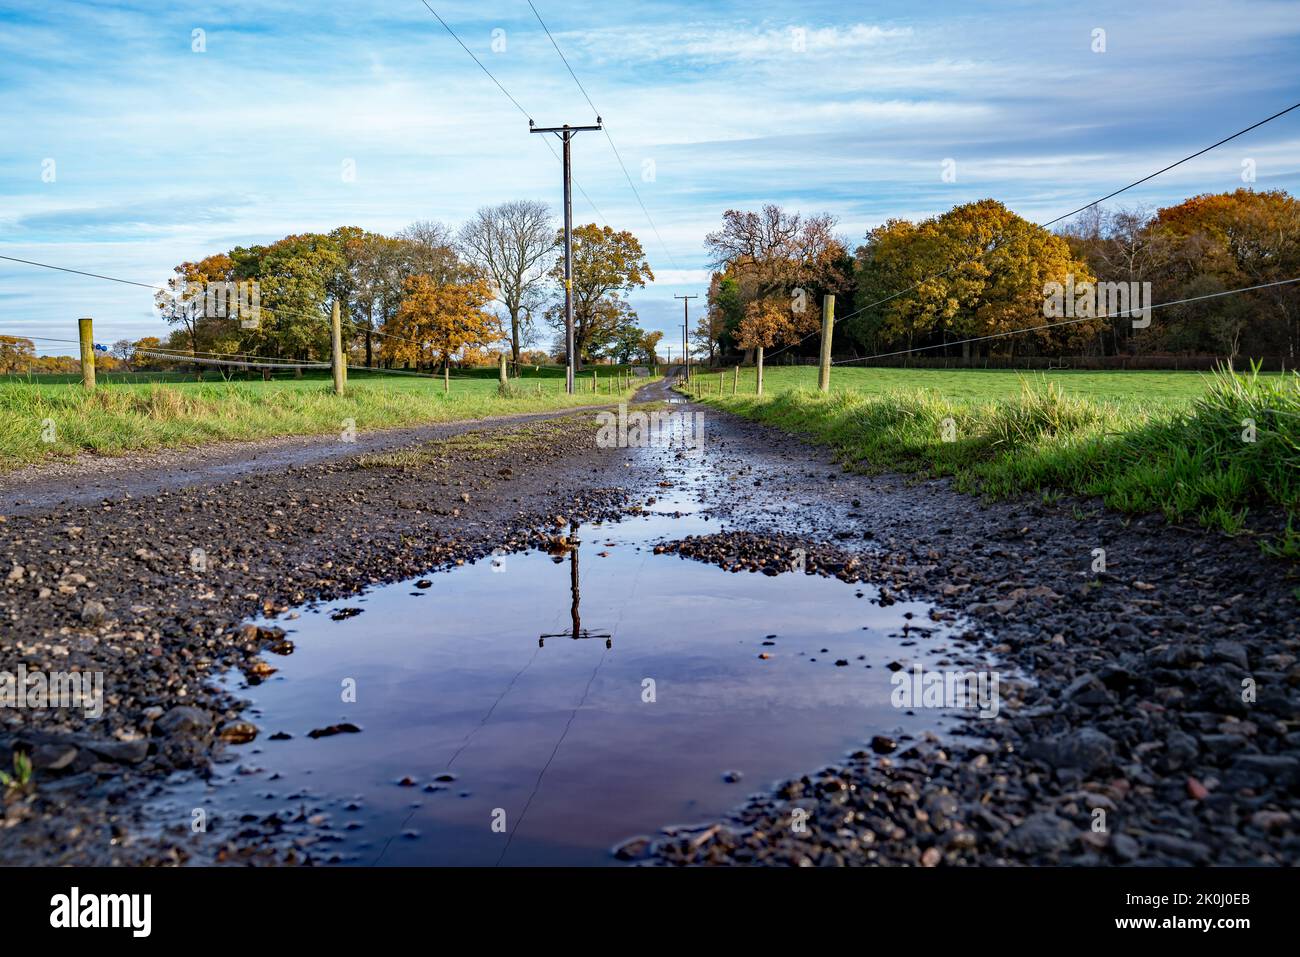 Reflections in a puddle on a country road. Perspective scene leading to a wooded area on the horizon. Blue skies with white layered cloud. Stock Photo